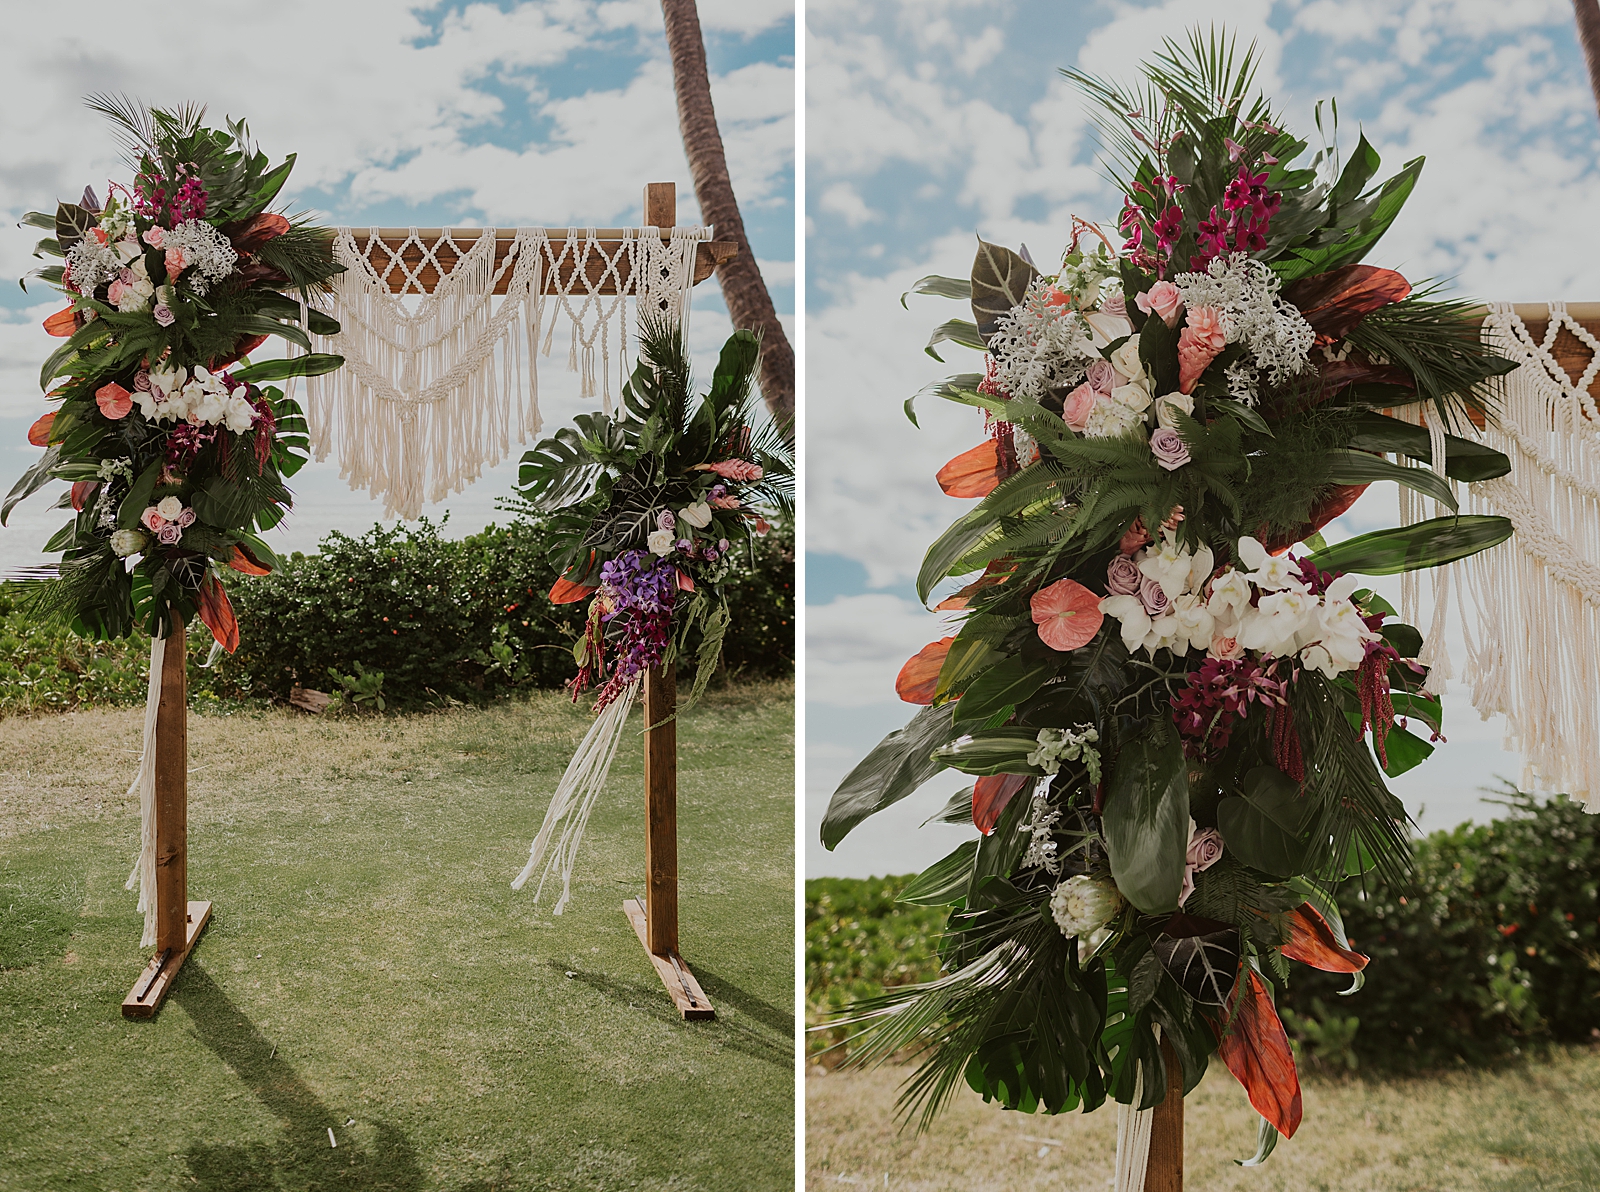 Detail shot of floral rectangular wedding arch and flowers on it for outdoor wedding